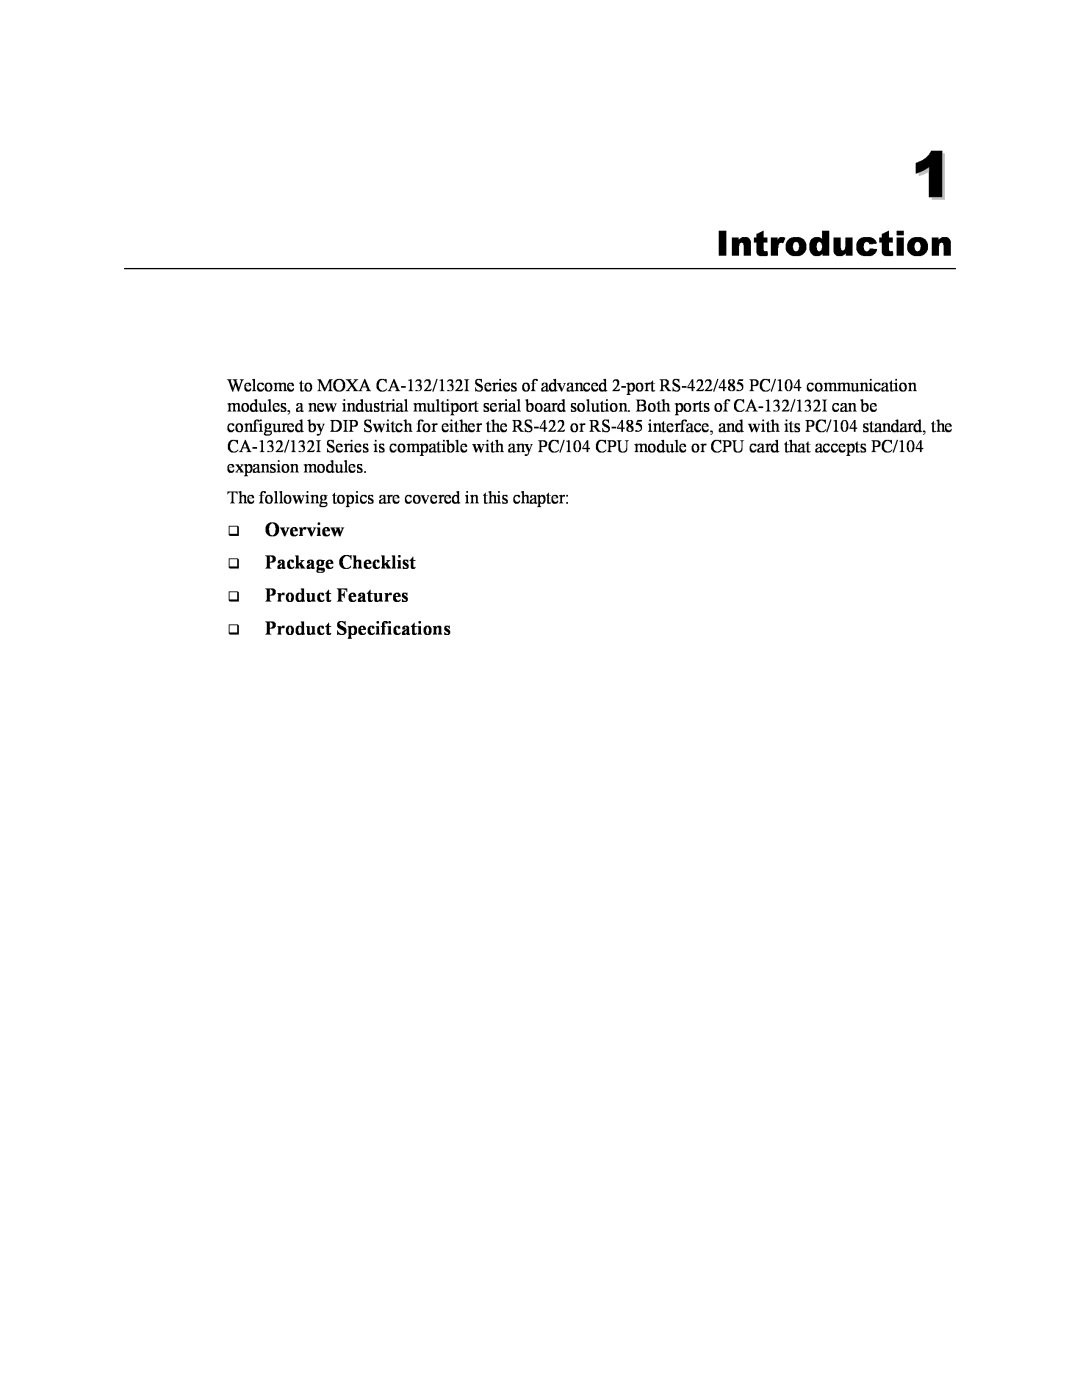 Moxa Technologies CA-132/132I user manual Introduction, Overview Package Checklist Product Features Product Specifications 